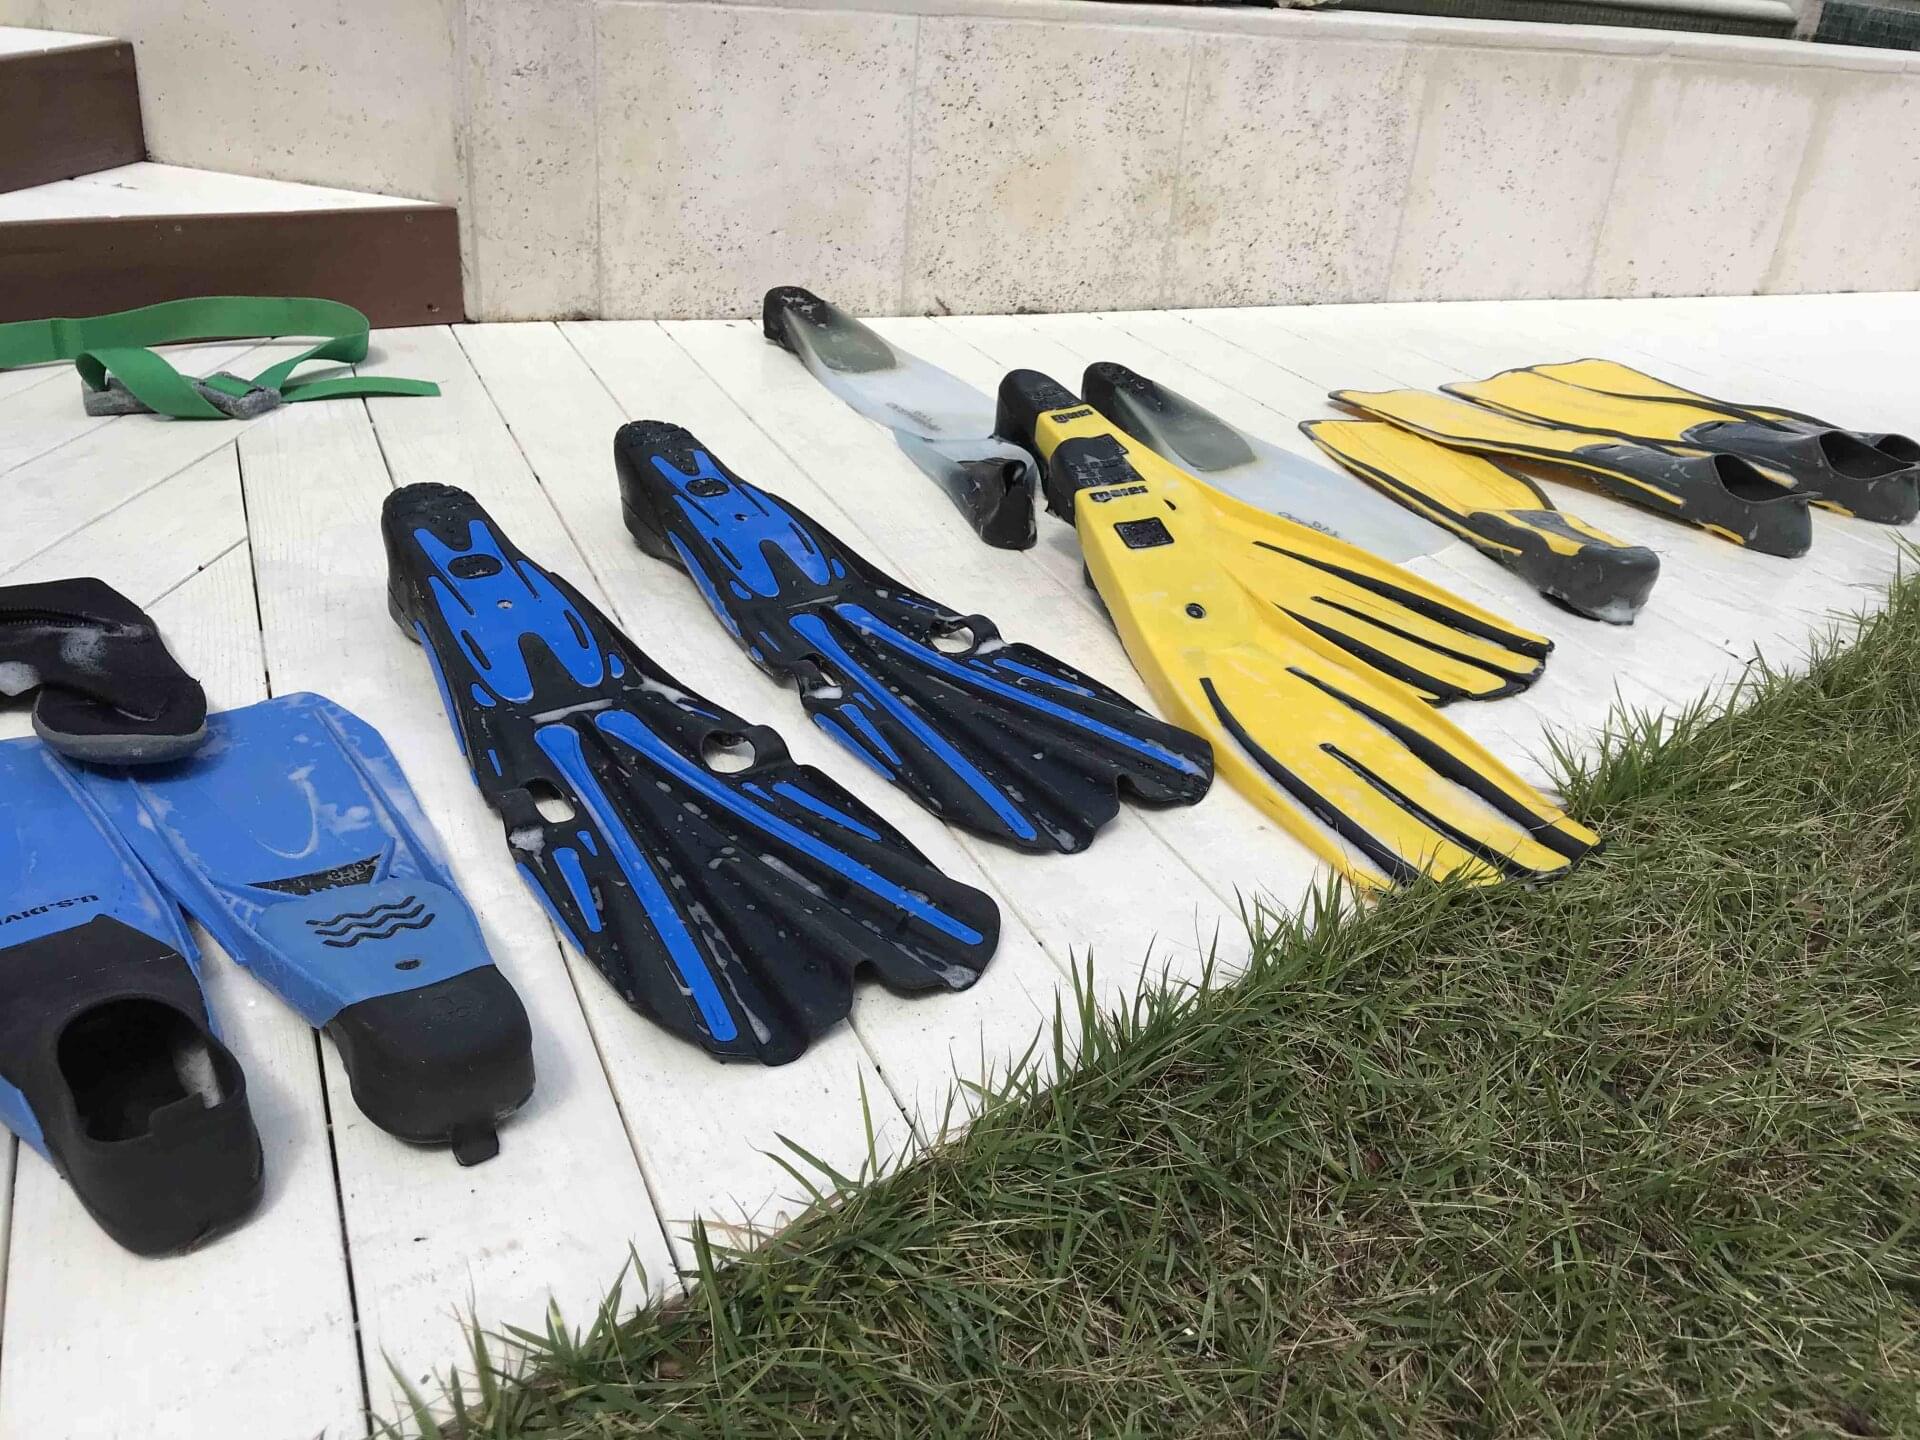 How to clean snorkeling gear OutsiderView